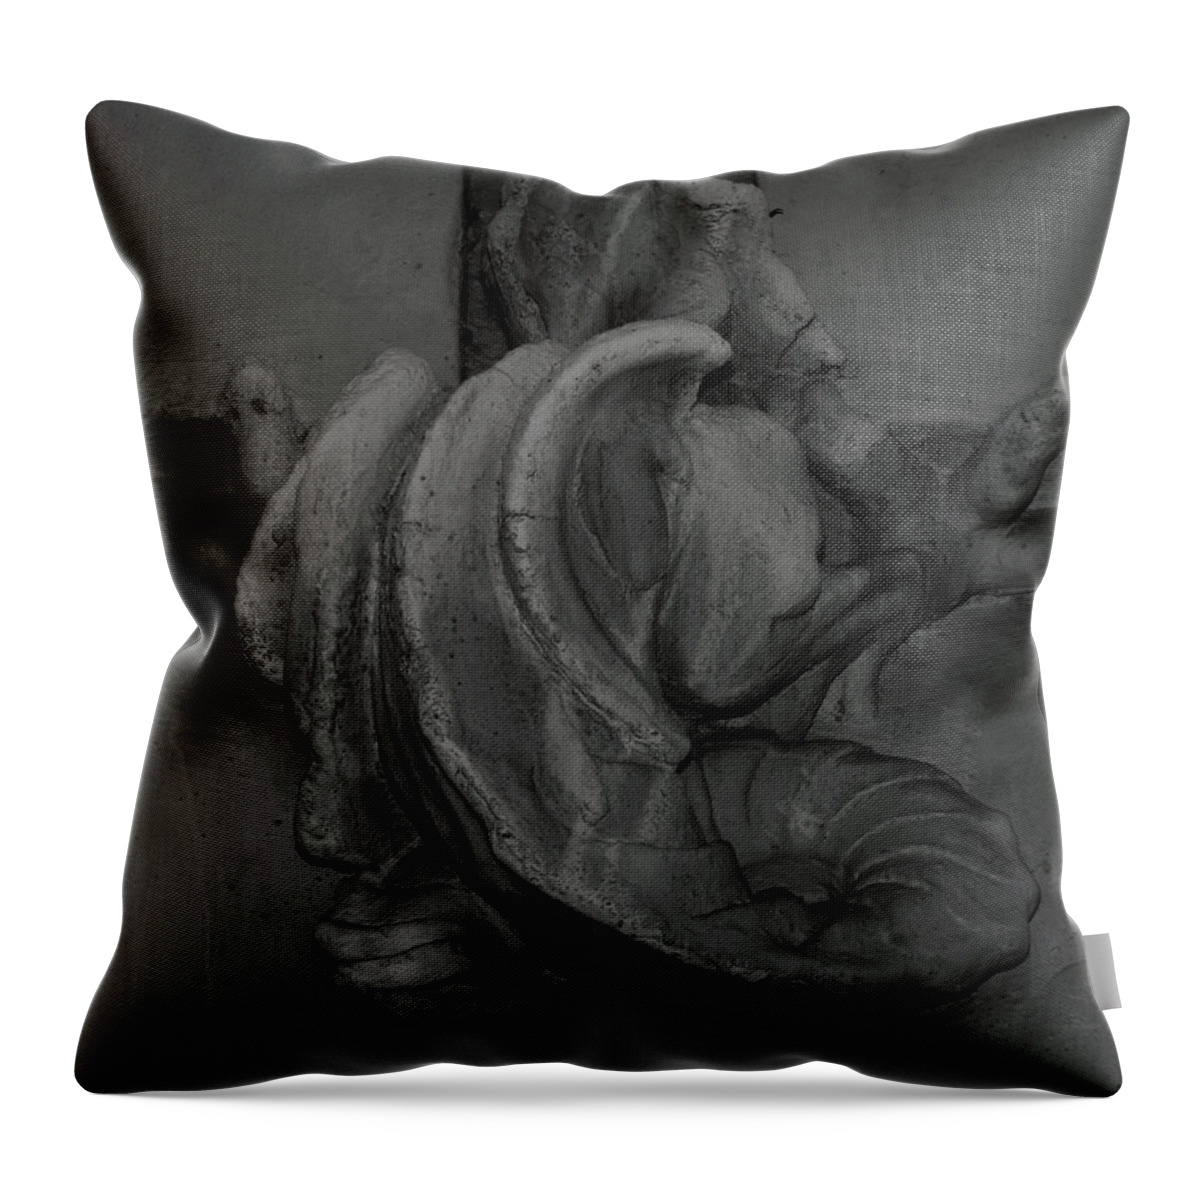 Little Throw Pillow featuring the photograph Little dragon by Emme Pons